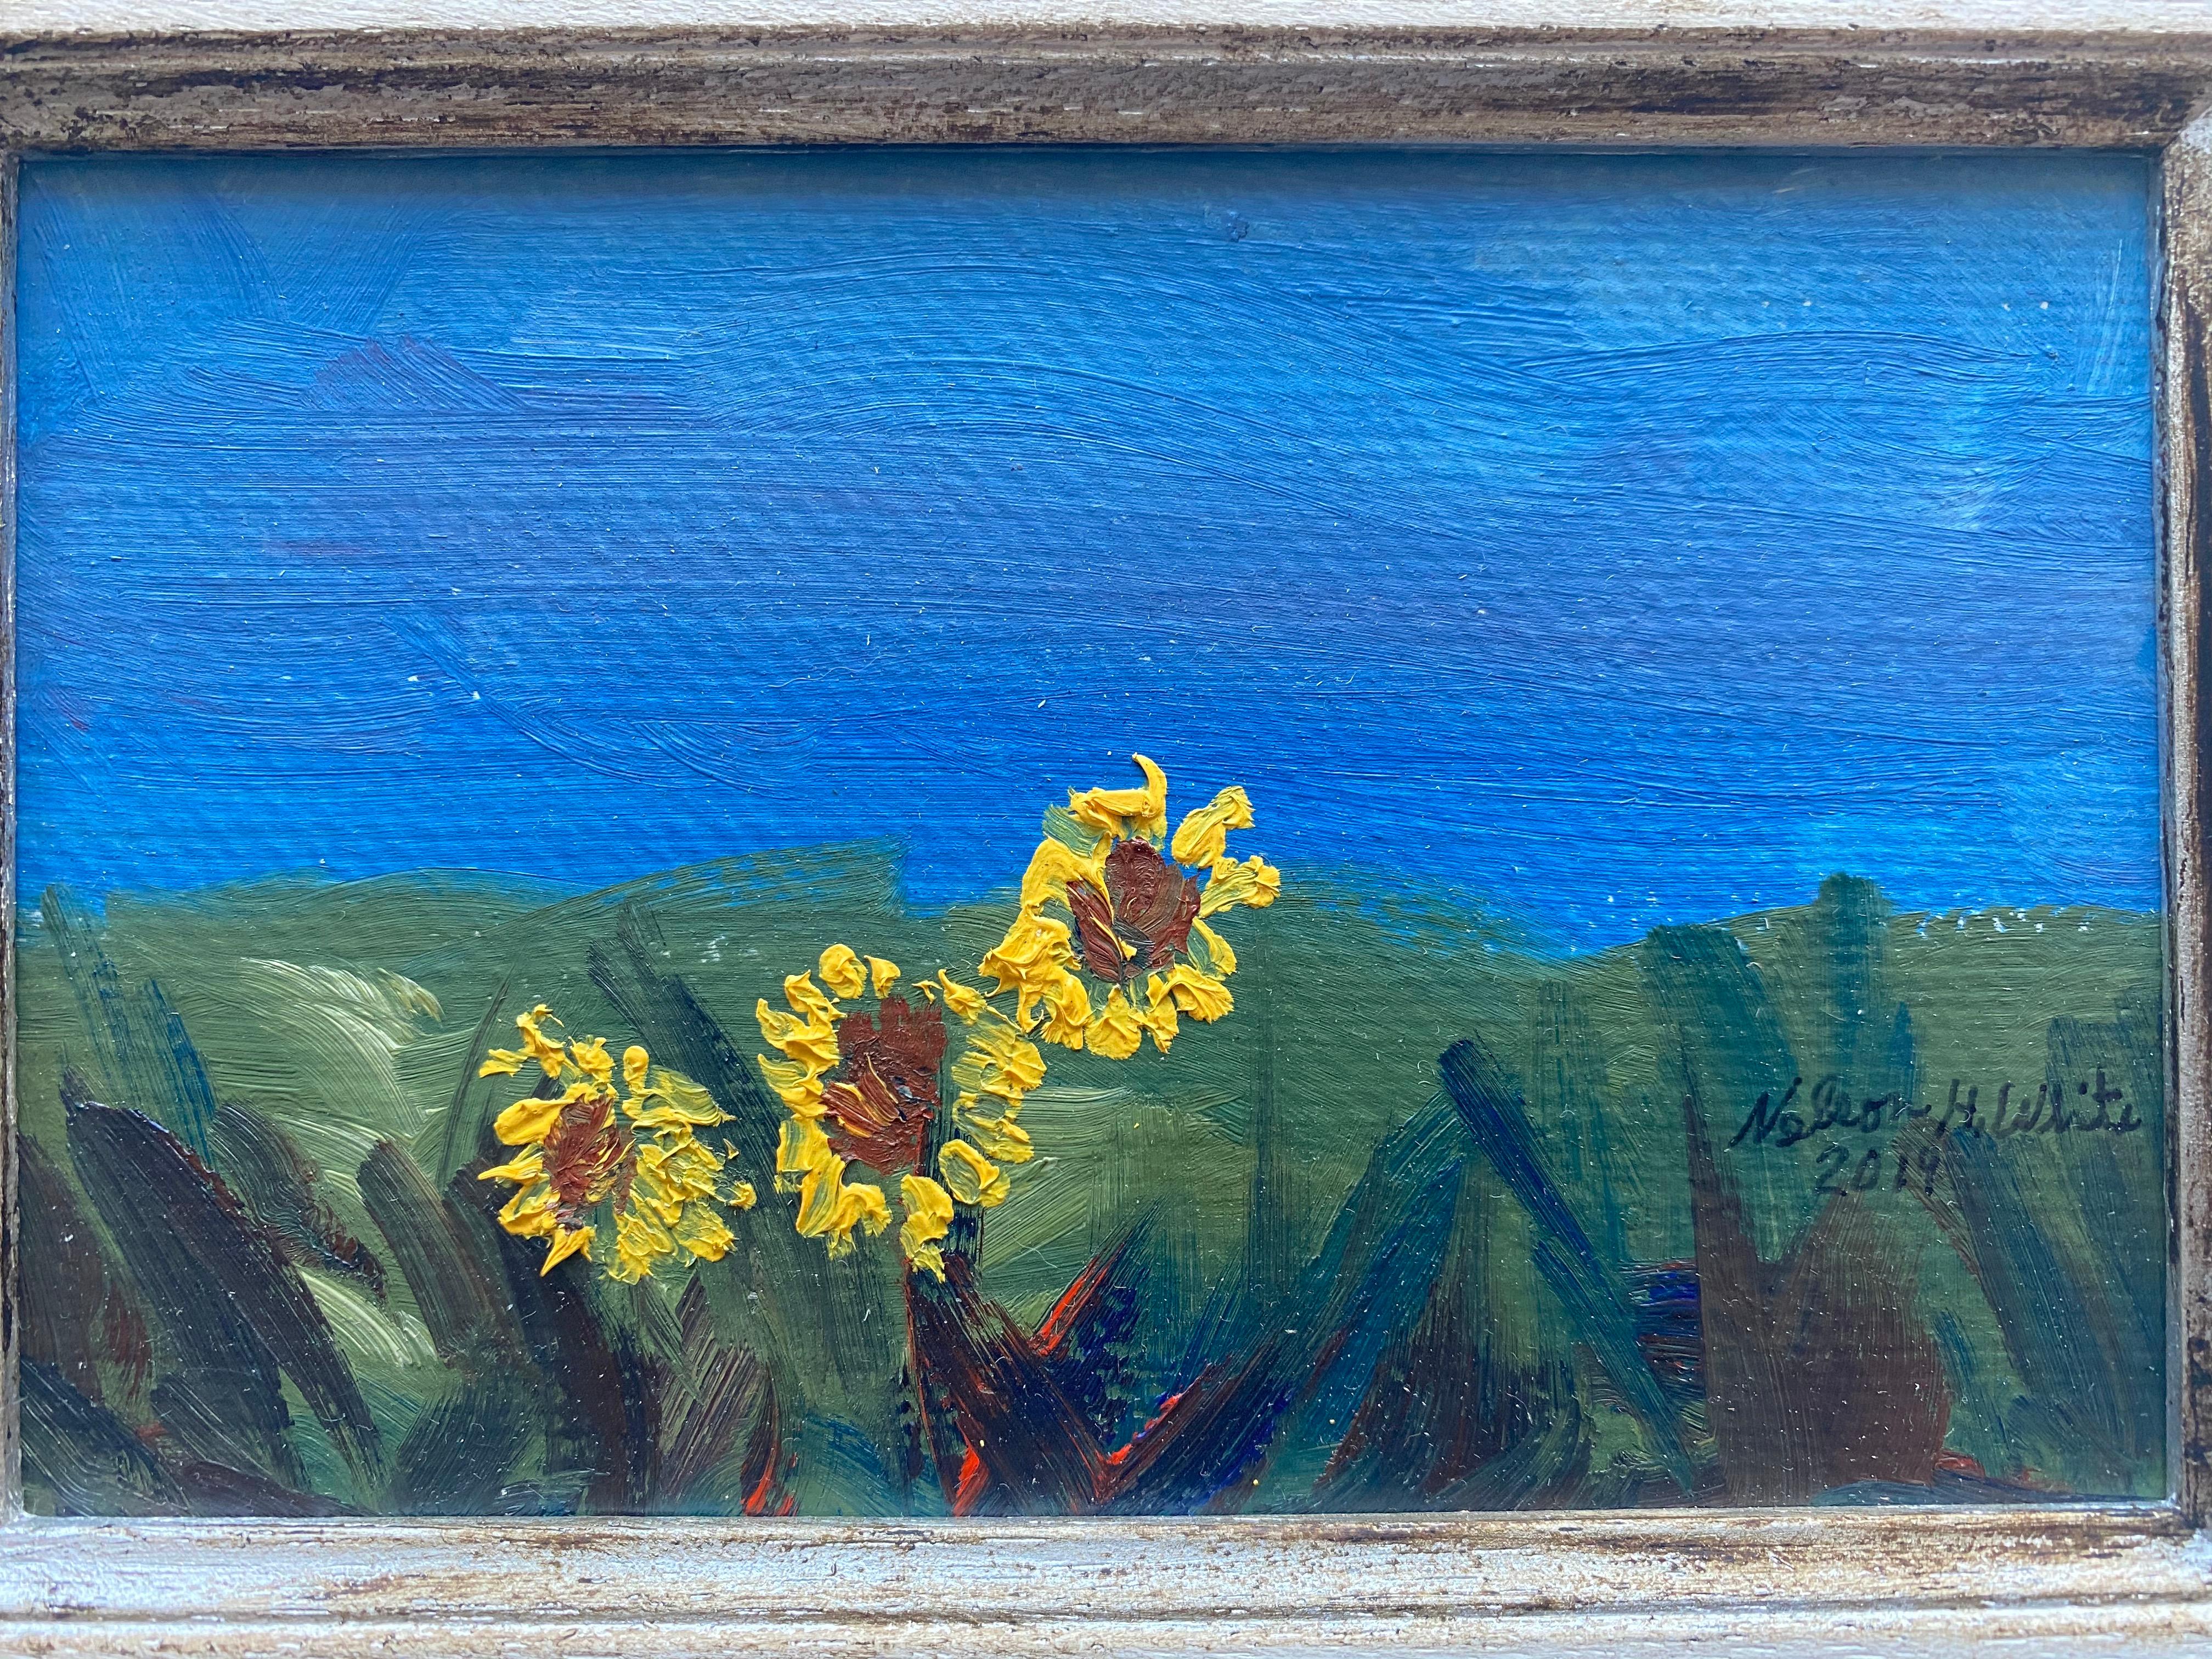 The Sunflowers 9.30.2019 - Painting by Nelson H. White